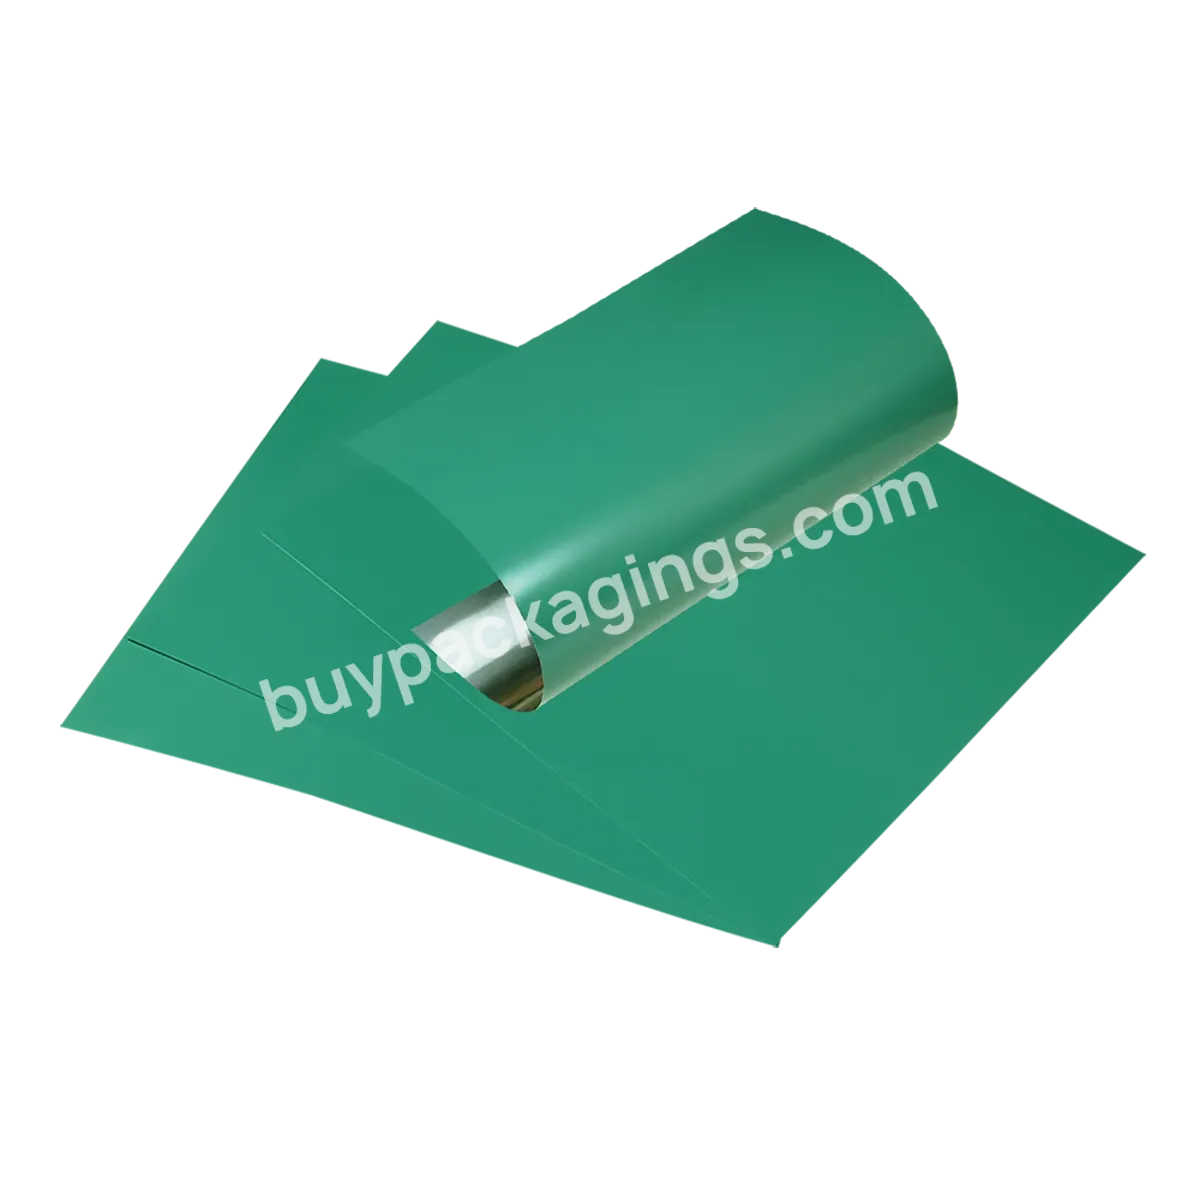 China Positive Ps Print Plate For Offset Printing Machine - Buy Ps Print Plate,Plate For Printing,China Positive Ps Print Plate For Offset Printing.